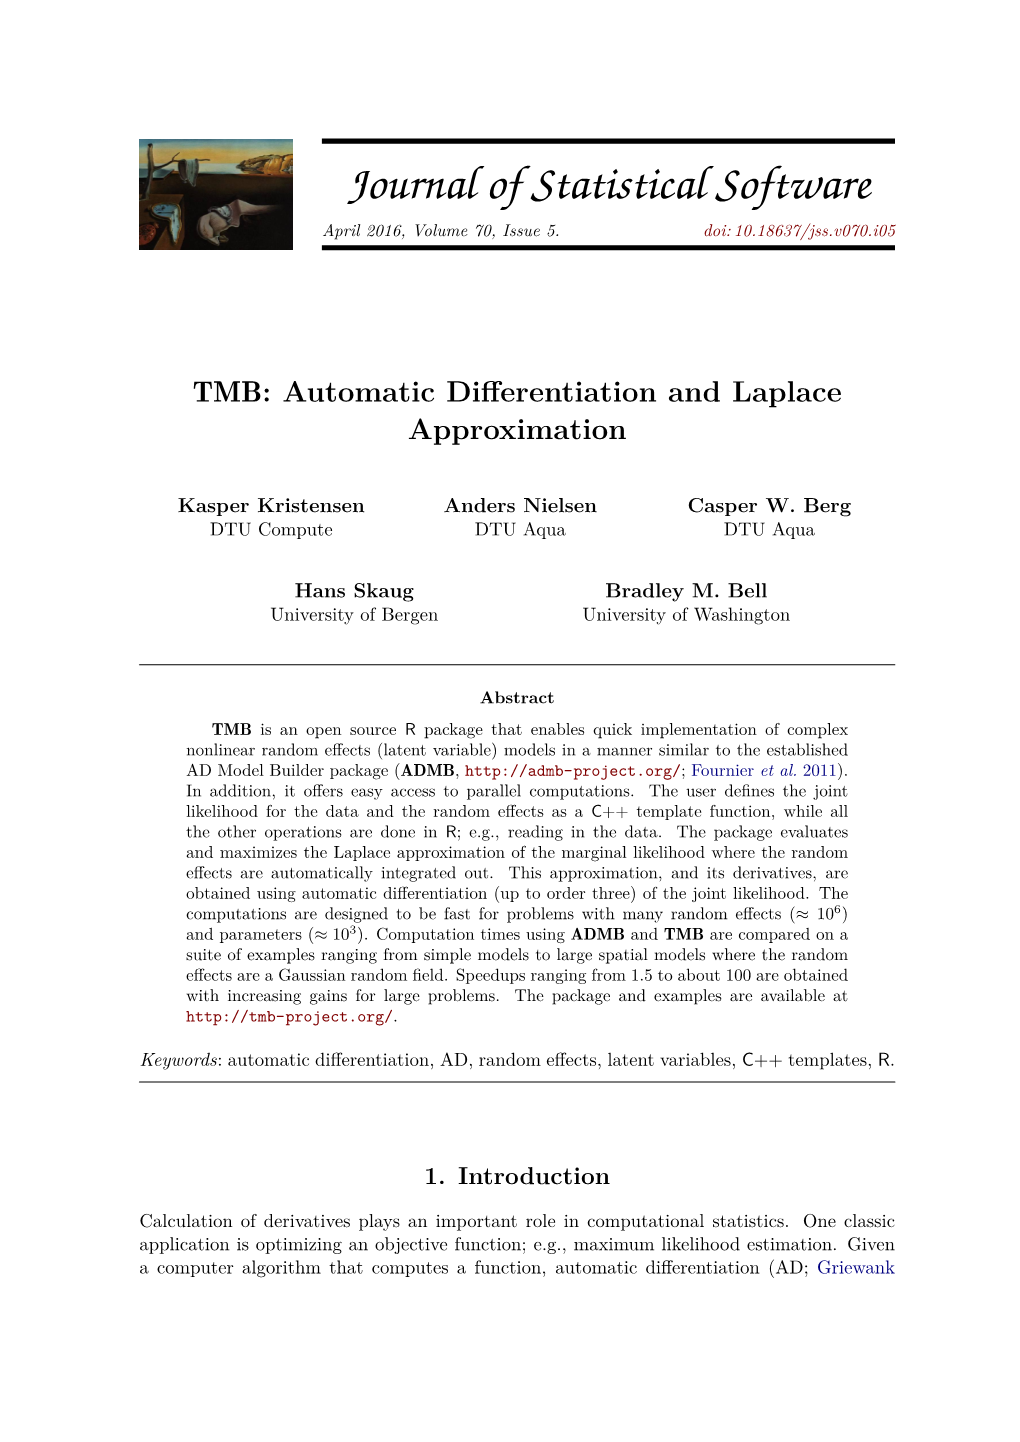 TMB: Automatic Differentiation and Laplace Approximation